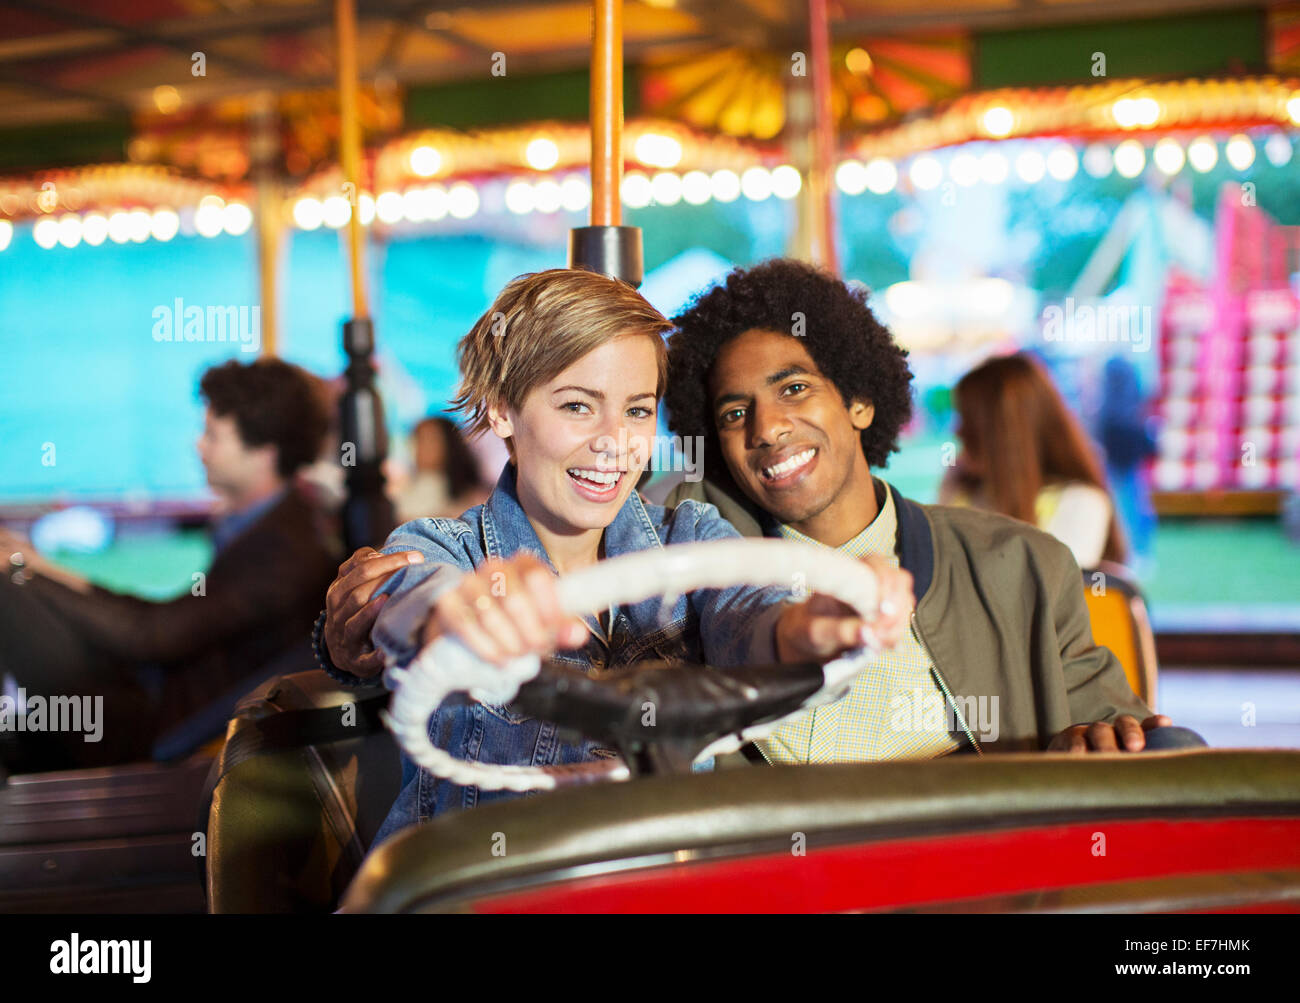 Young couple on bumper car ride in amusement park Stock Photo